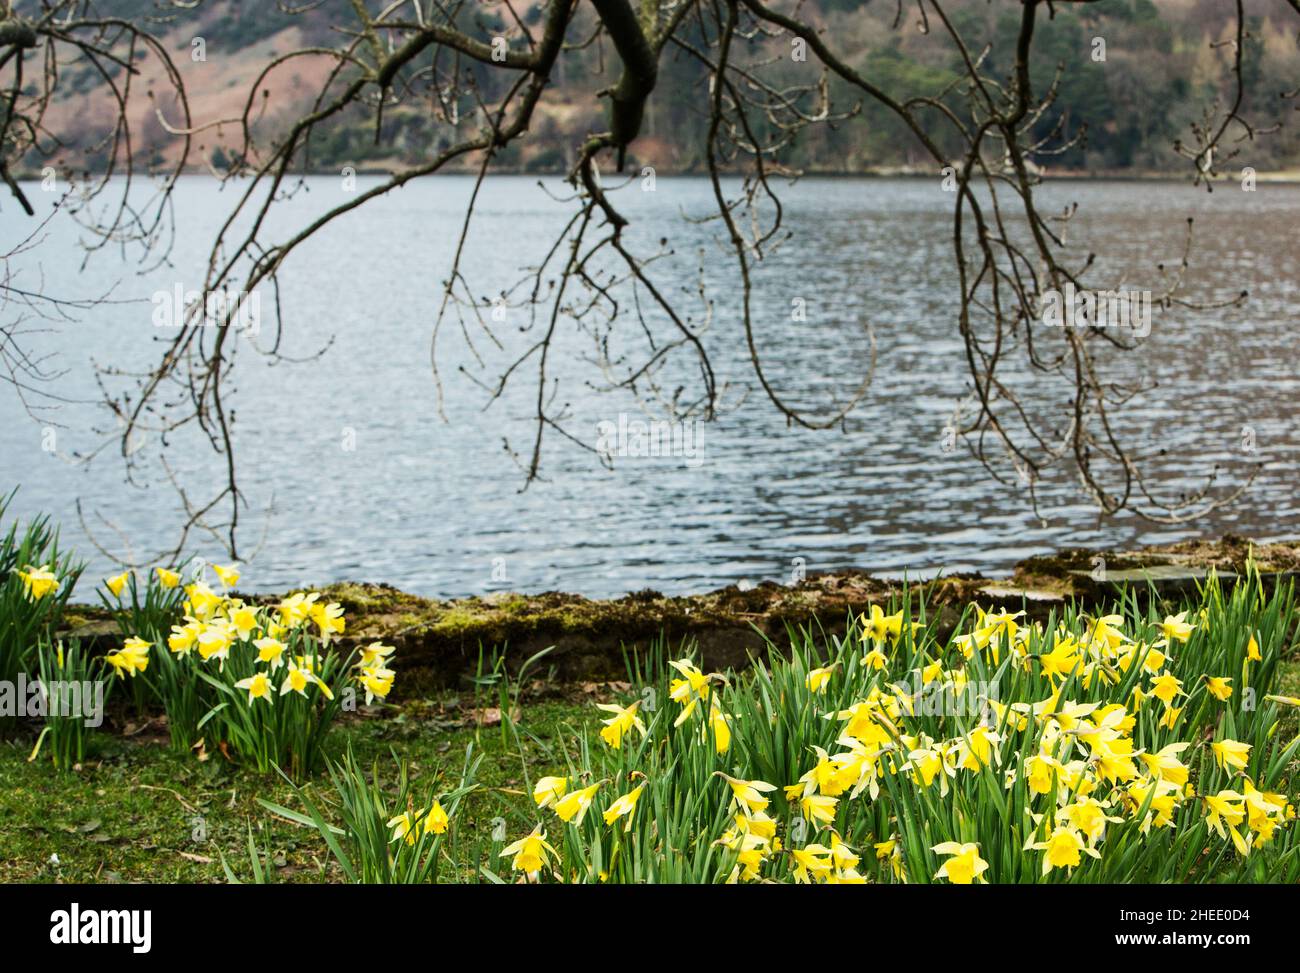 William Wordsworth host of golden daffodils beside Ullswater at Glenridding,The Lake District National Park, Cumbria, England Stock Photo